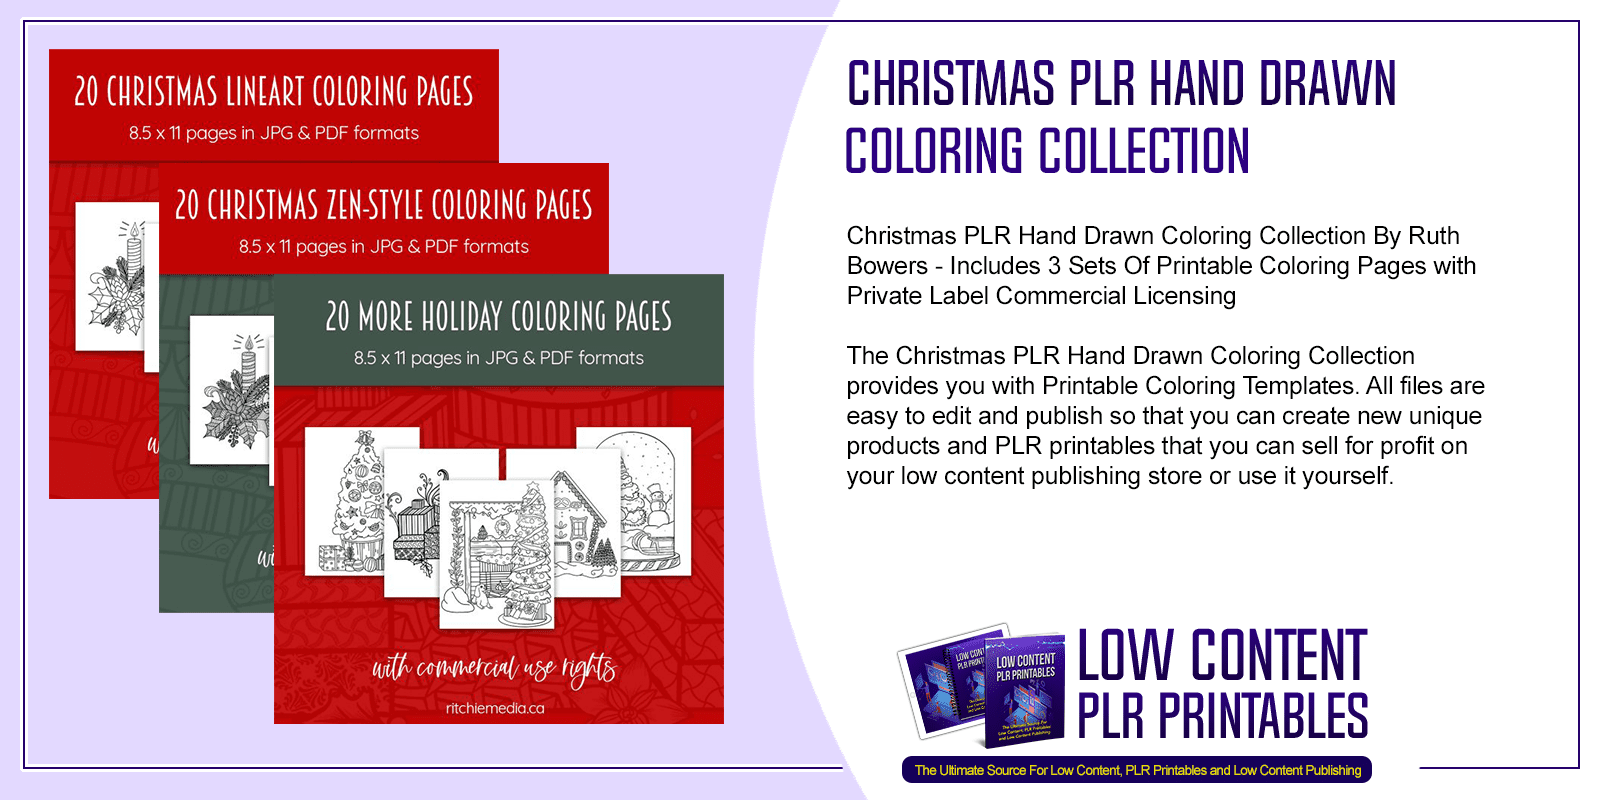 Christmas PLR Hand Drawn Coloring Collection